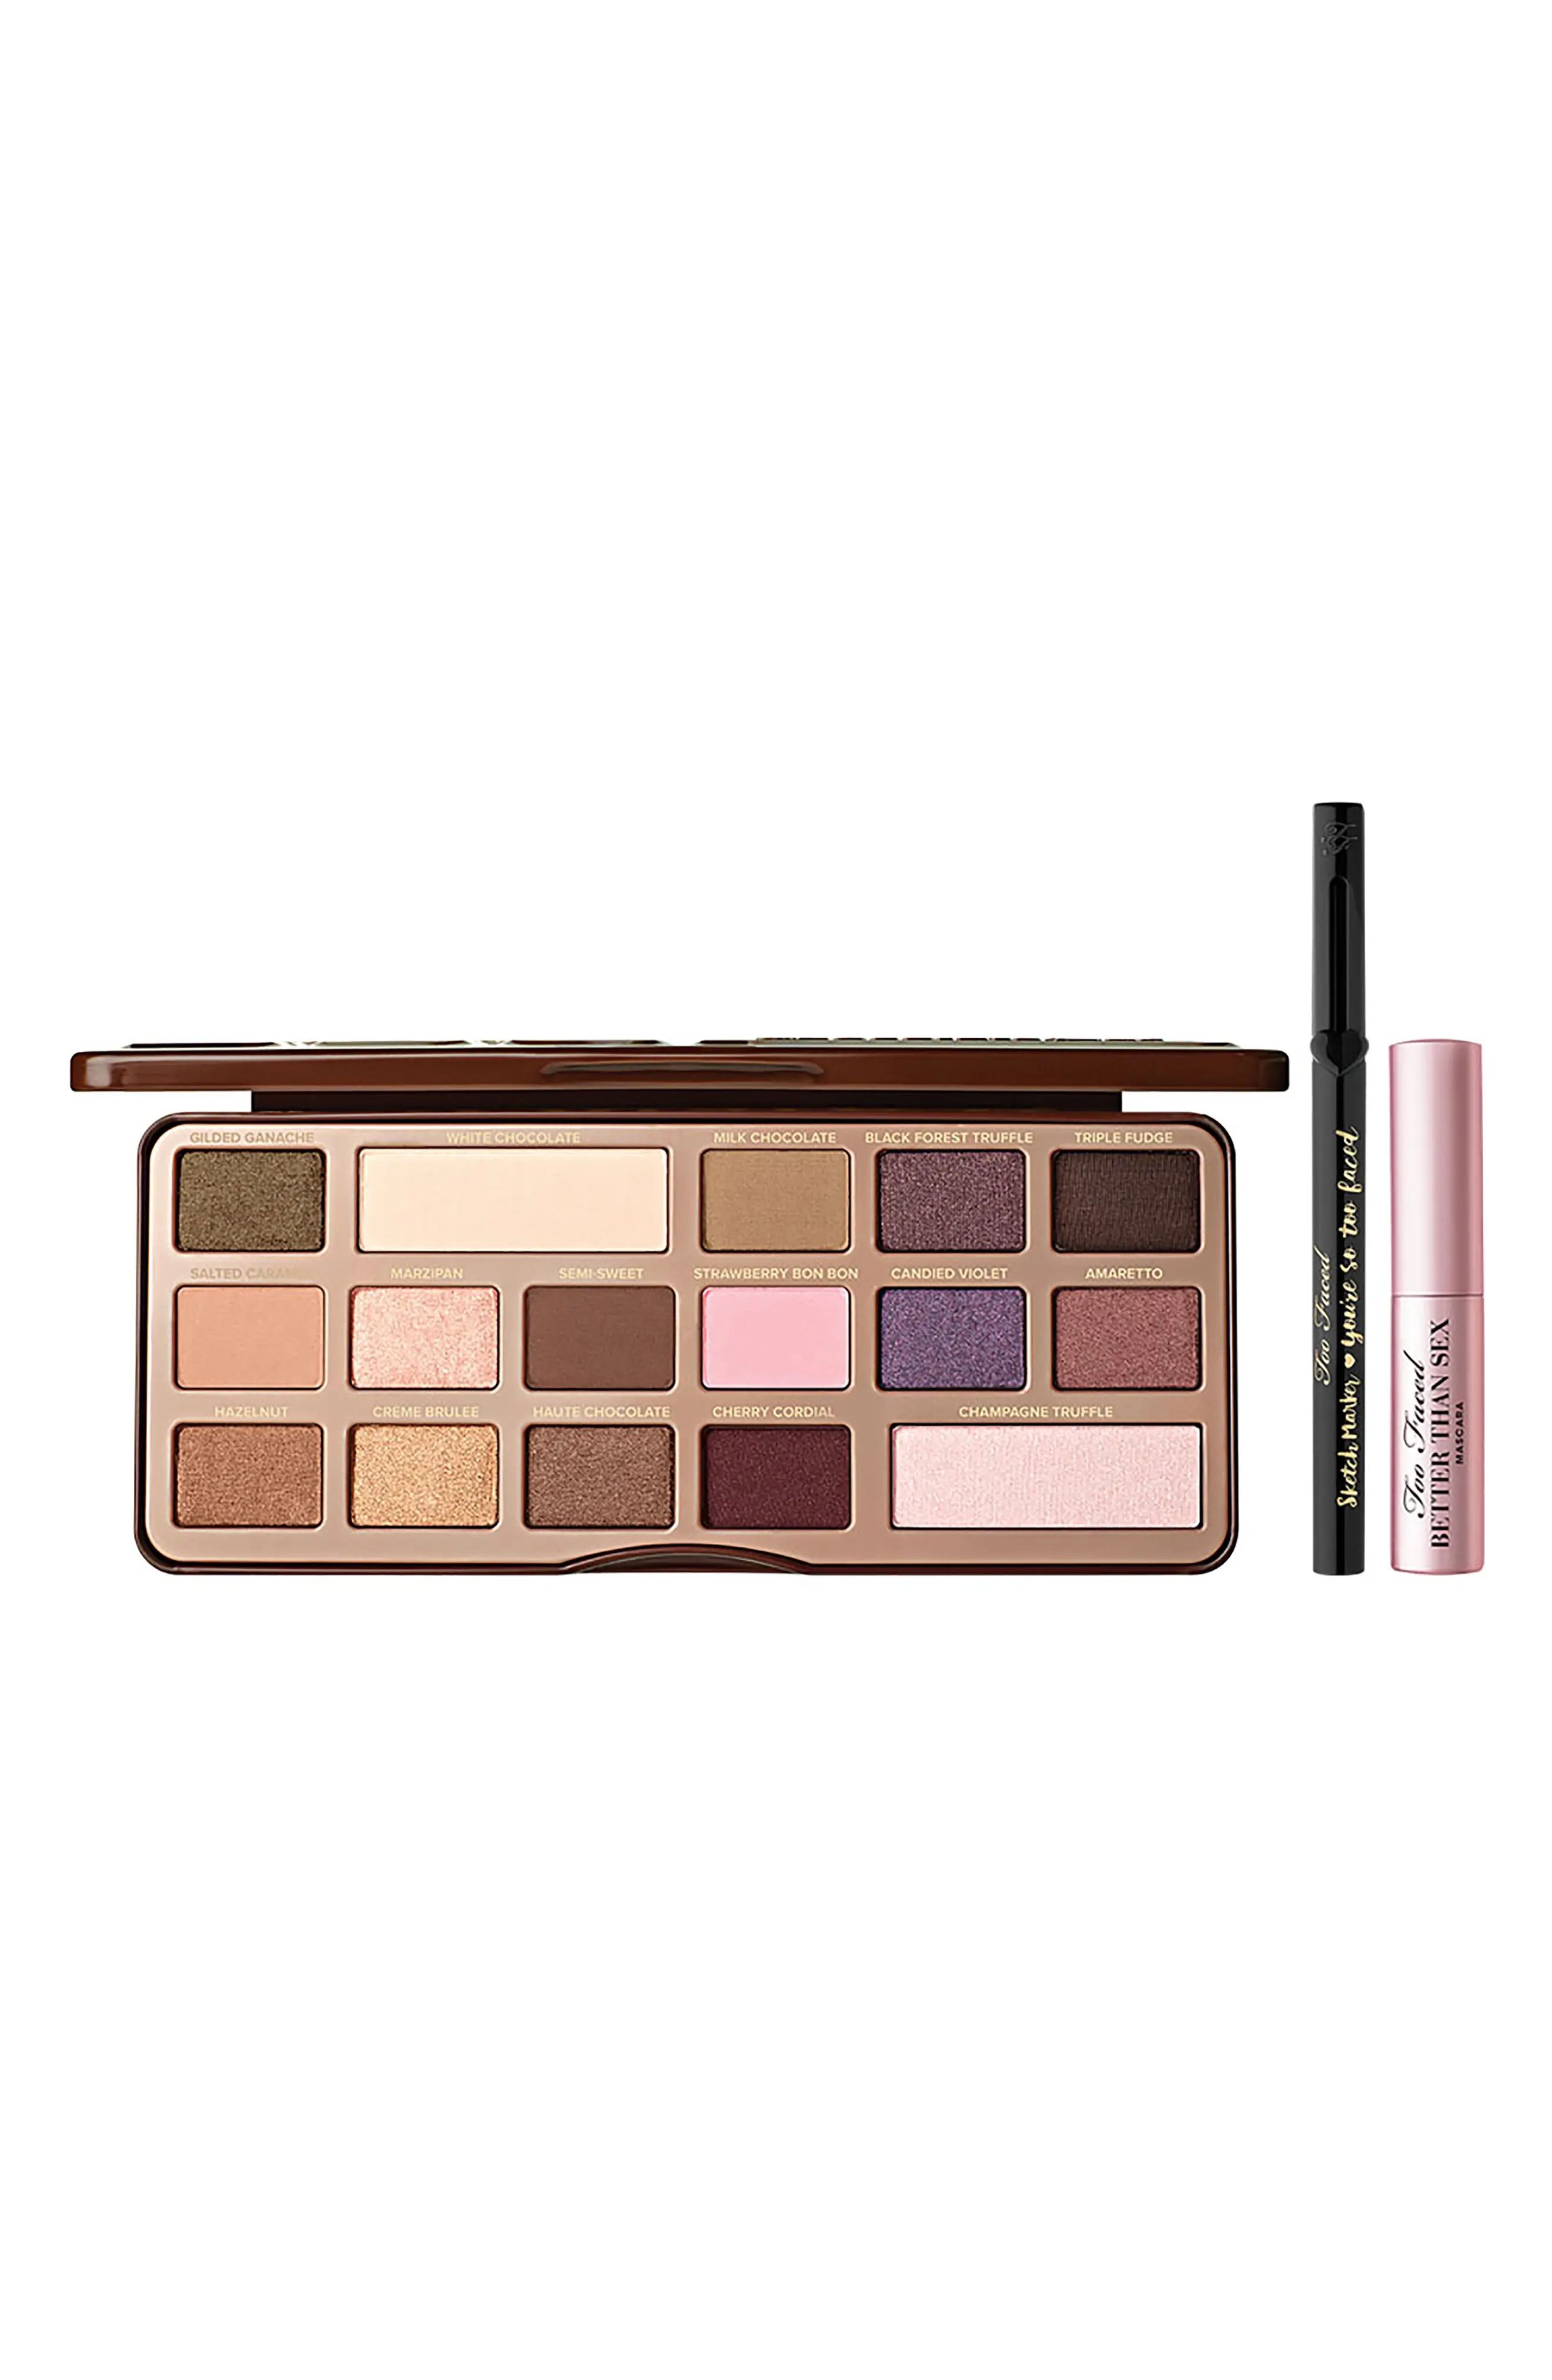 Too Faced Sweet, Sexy & Too Faced Set ($81 Value) | Nordstrom